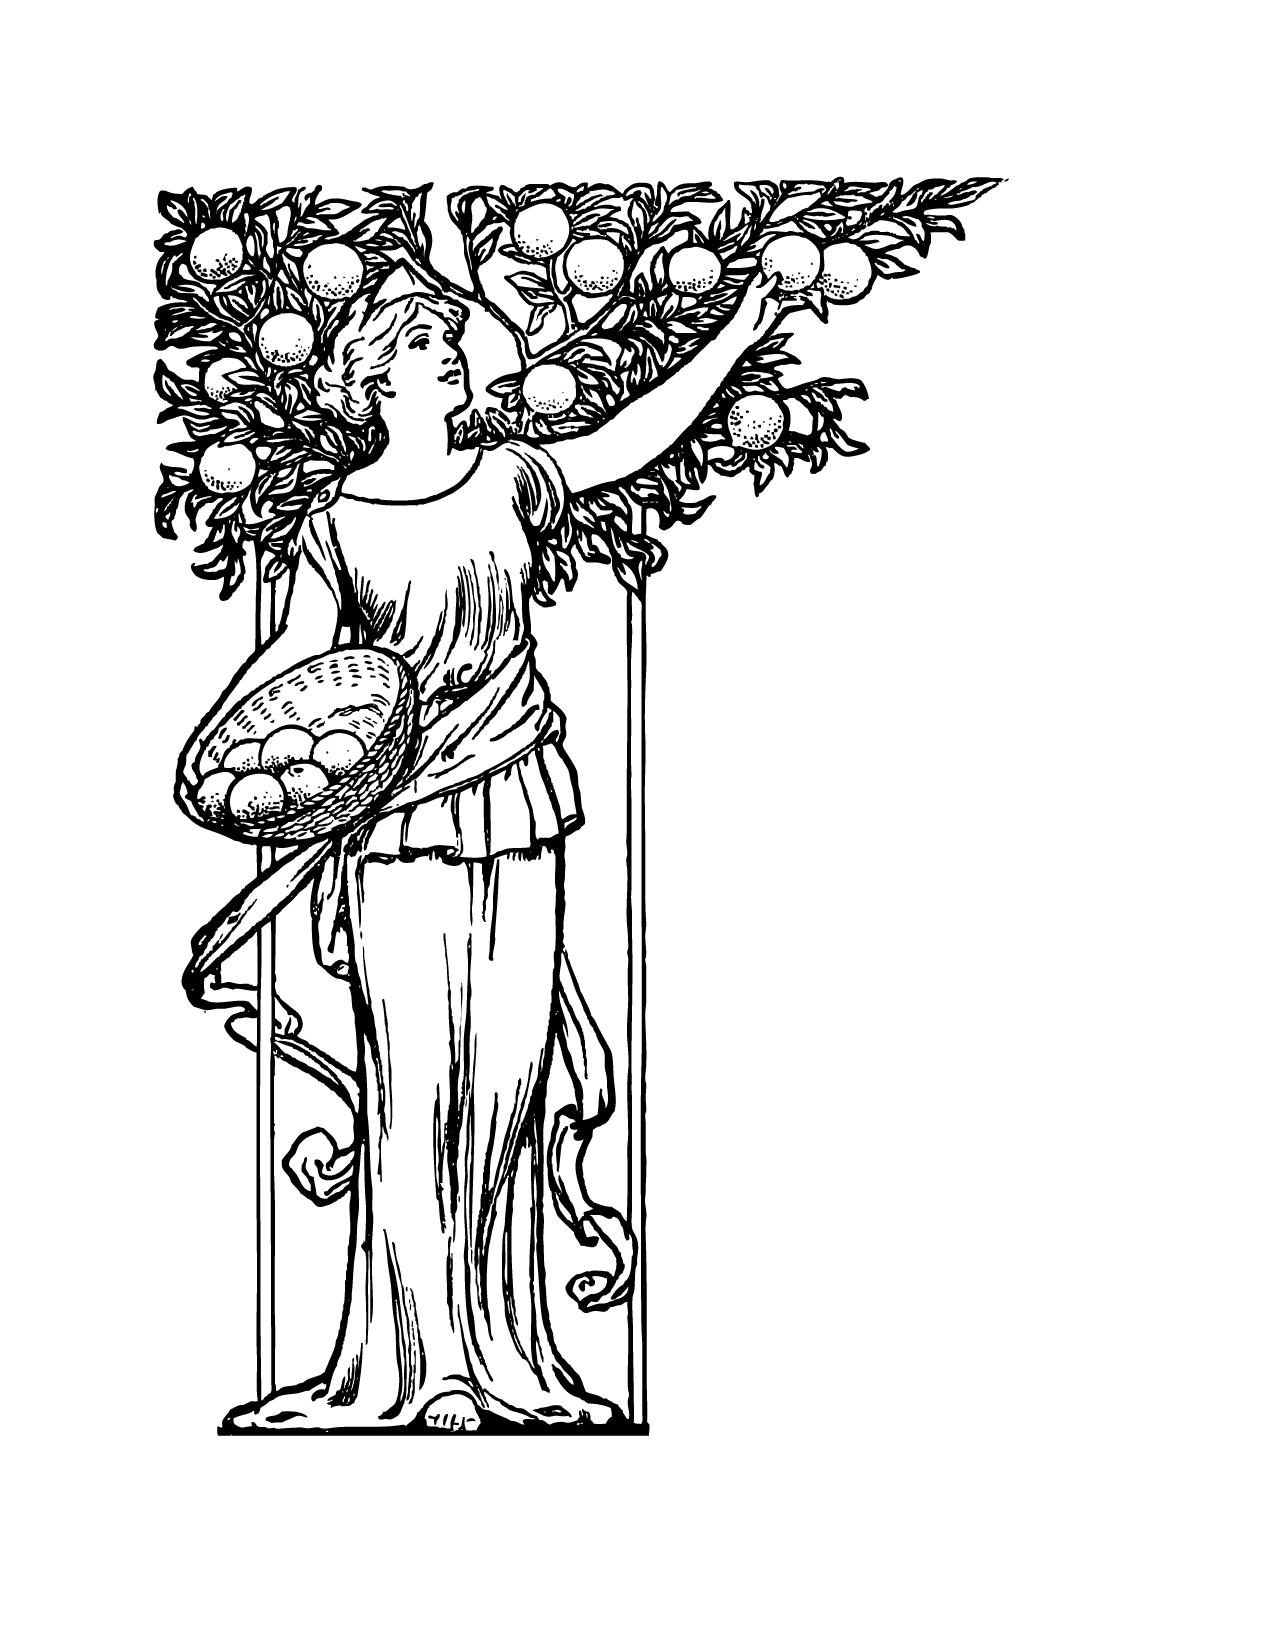 Orange Harvest Calligraphy Coloring Page